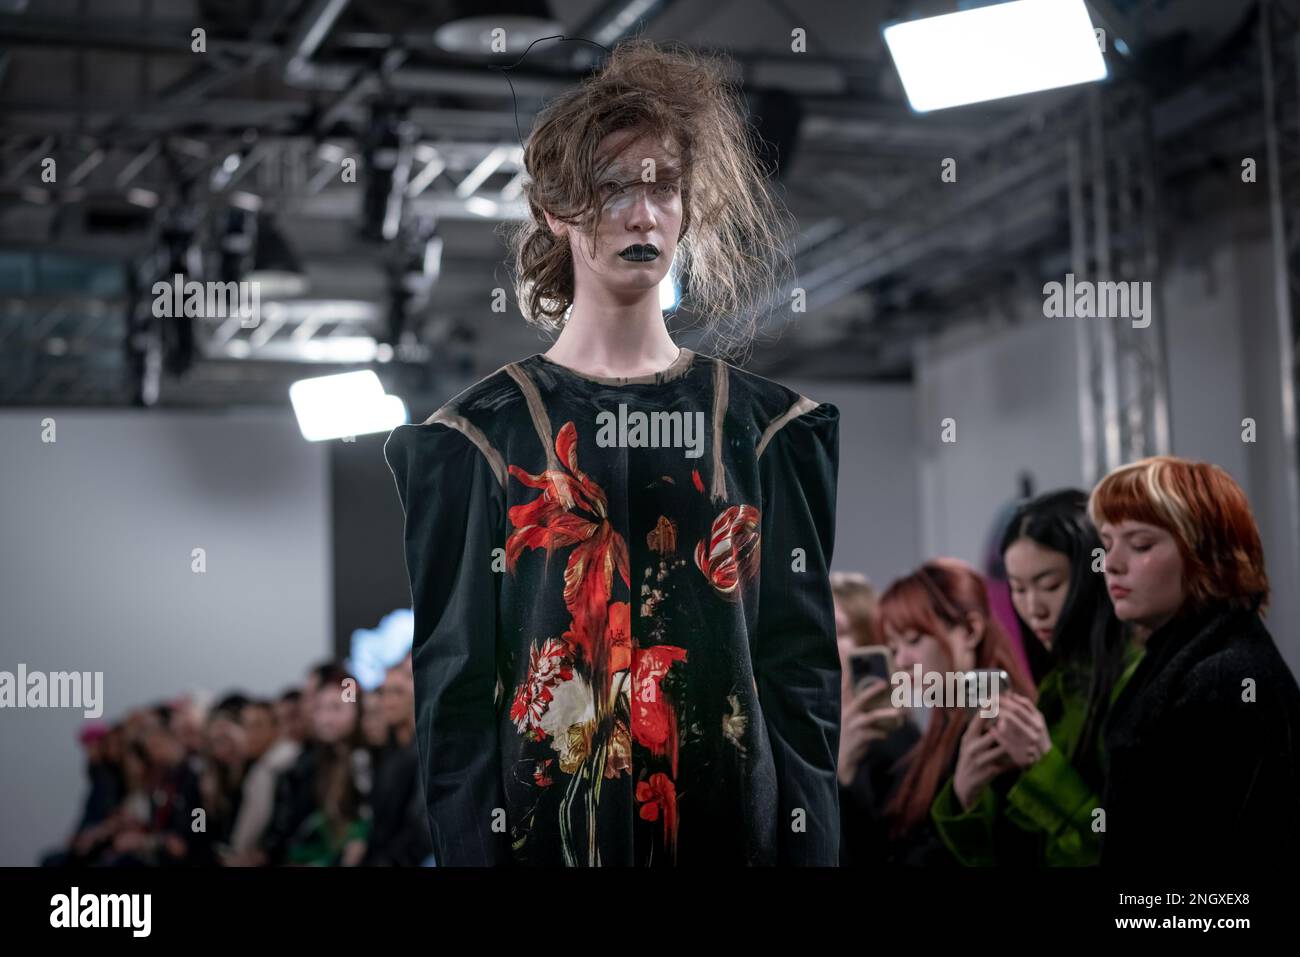 London, UK. 18th February 2023. London Fashion Week: IA London presents  'Asymmetrix' at Protein Studios in Shoreditch. The runway show of  sustainable, ethically produced womenswear holds a strong artistic brand  identity and